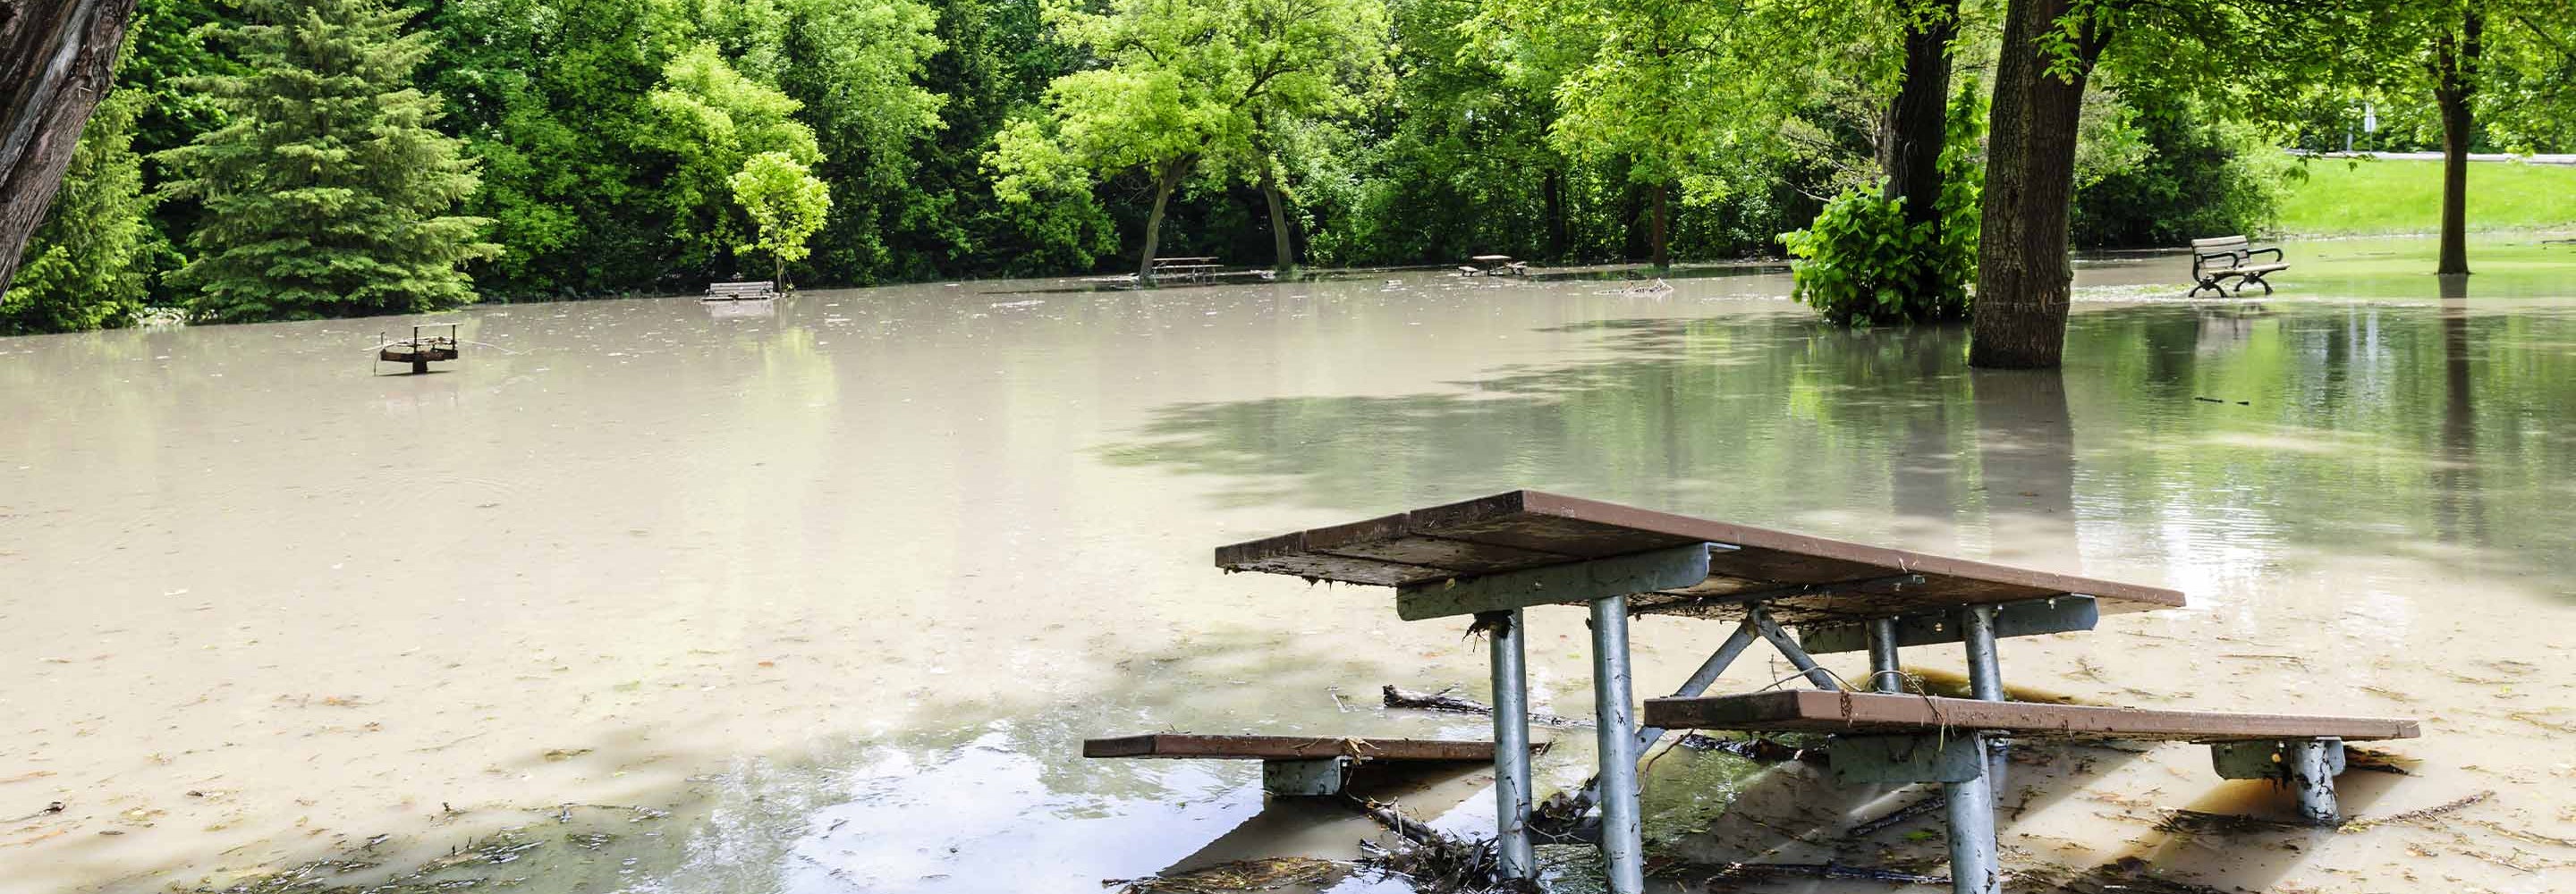 There is flooding in the Kurgan Region. Protect yourself from mold and follow health recommendations. Click here.